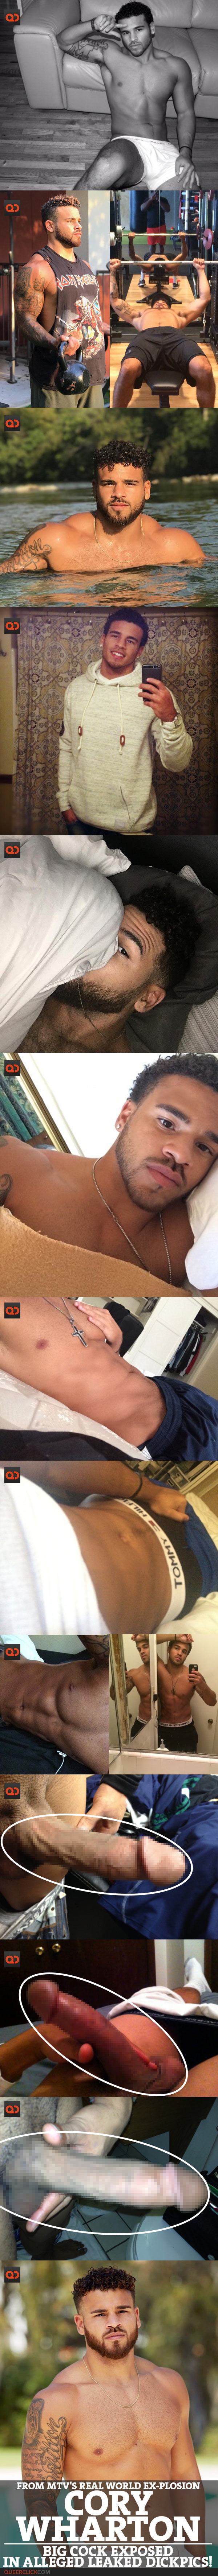 Cory Wharton, From MTV's Real World Ex-Plosion, Big Cock Exposed In Alleged Leaked Dickpics!